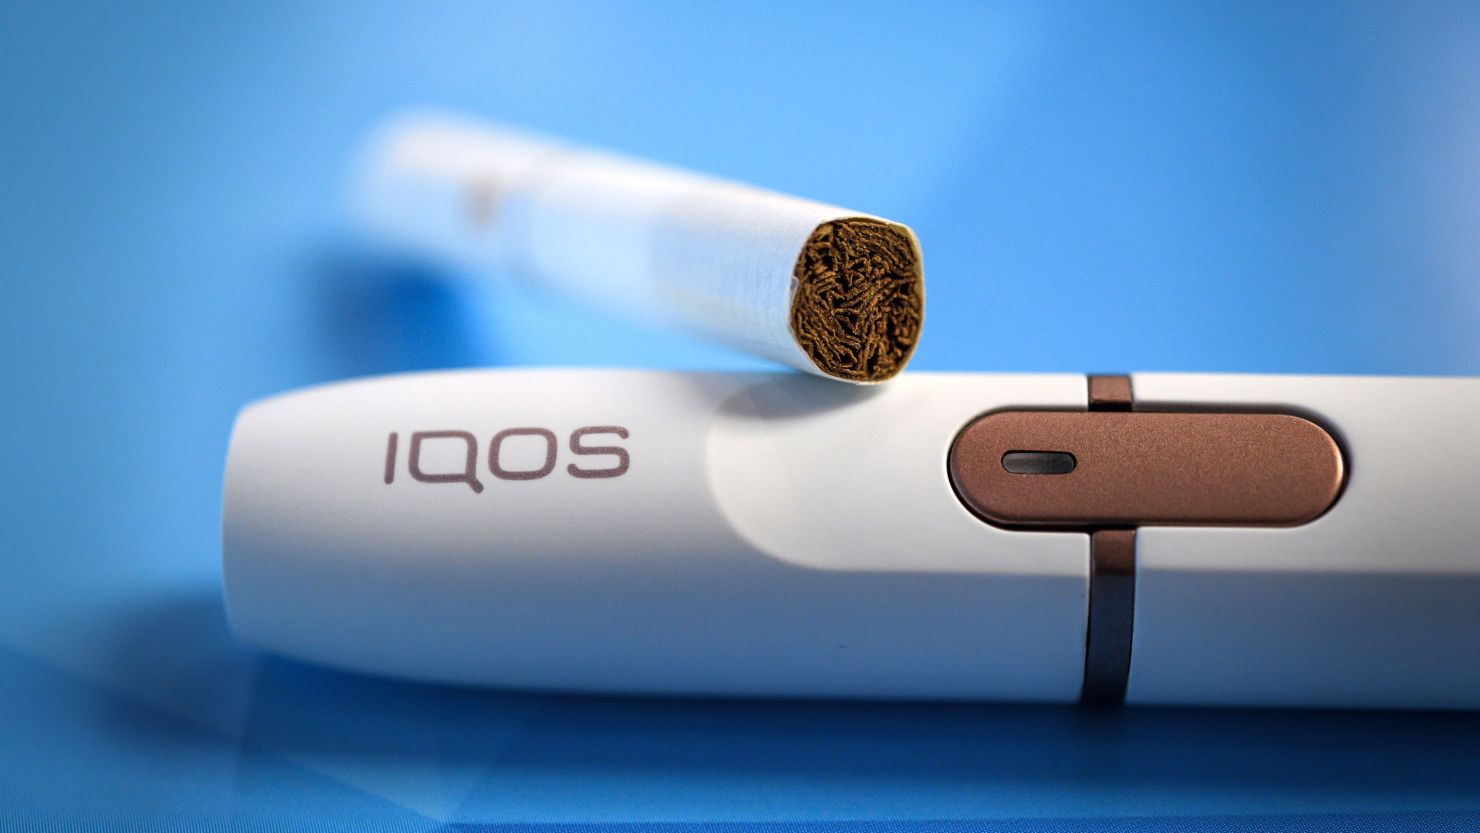 FDA allows sale of new electronic tobacco product